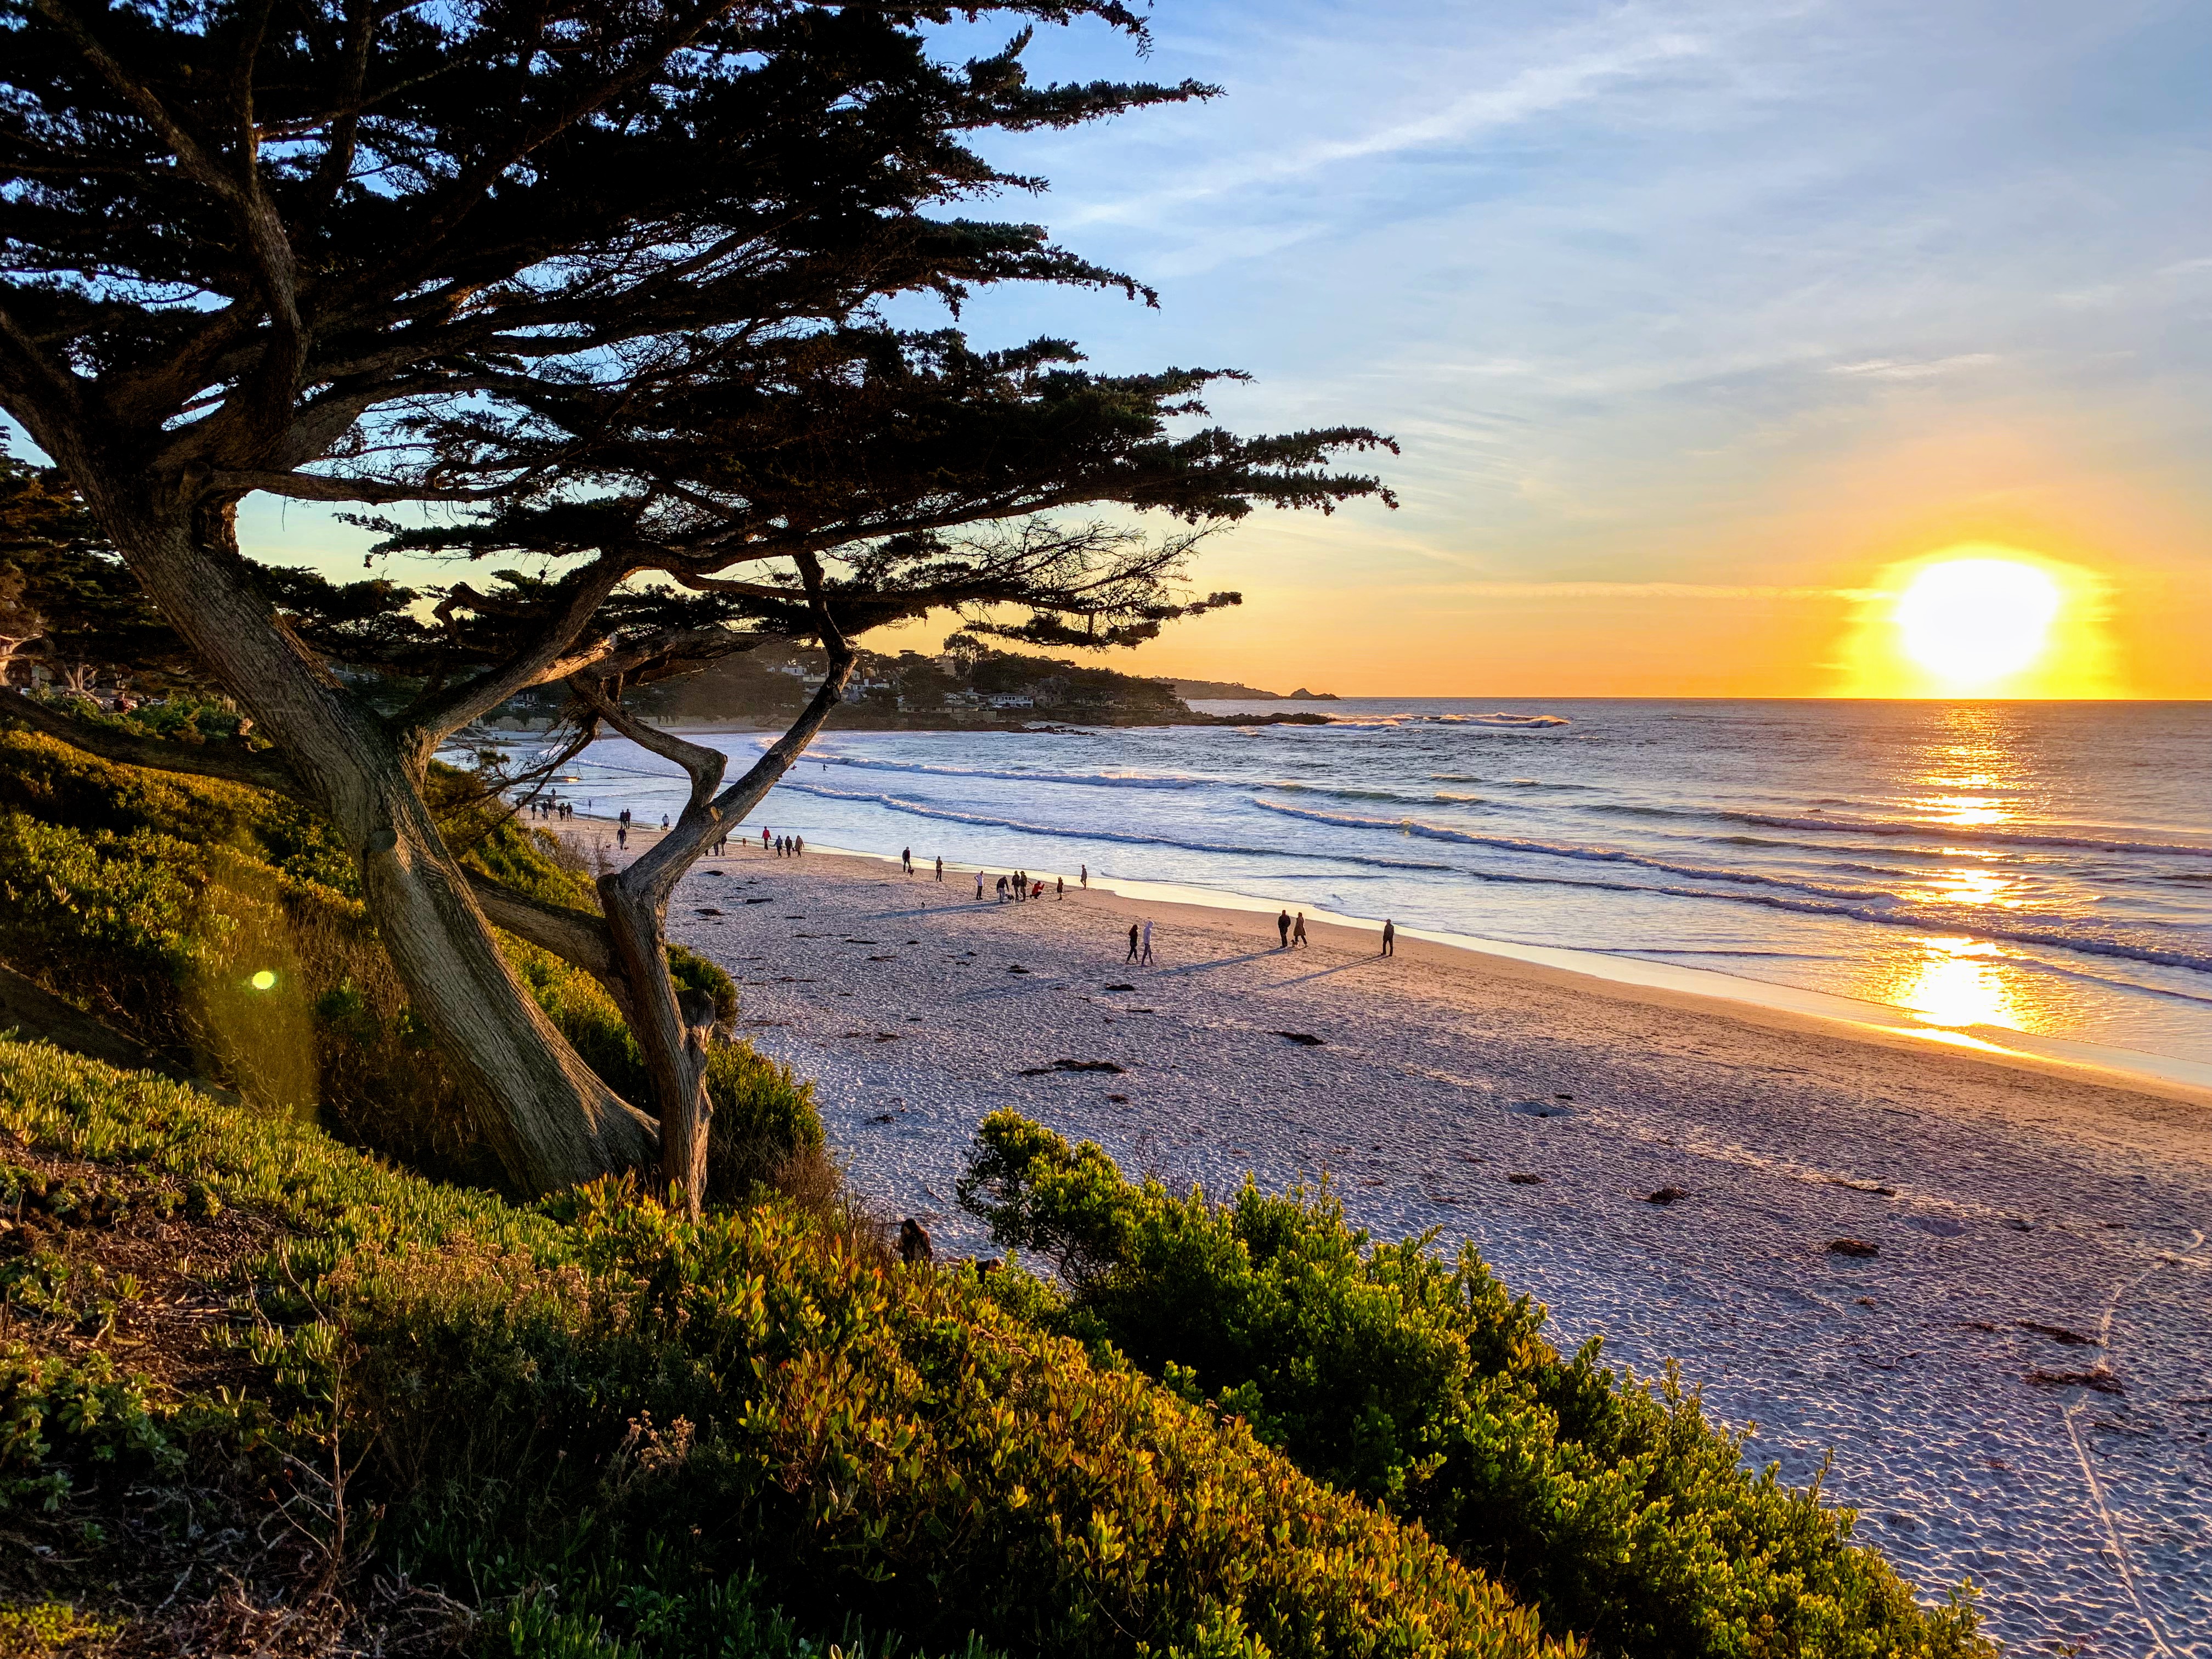 The Perfect Weekend In An Idyllic Town CarmelbytheSea